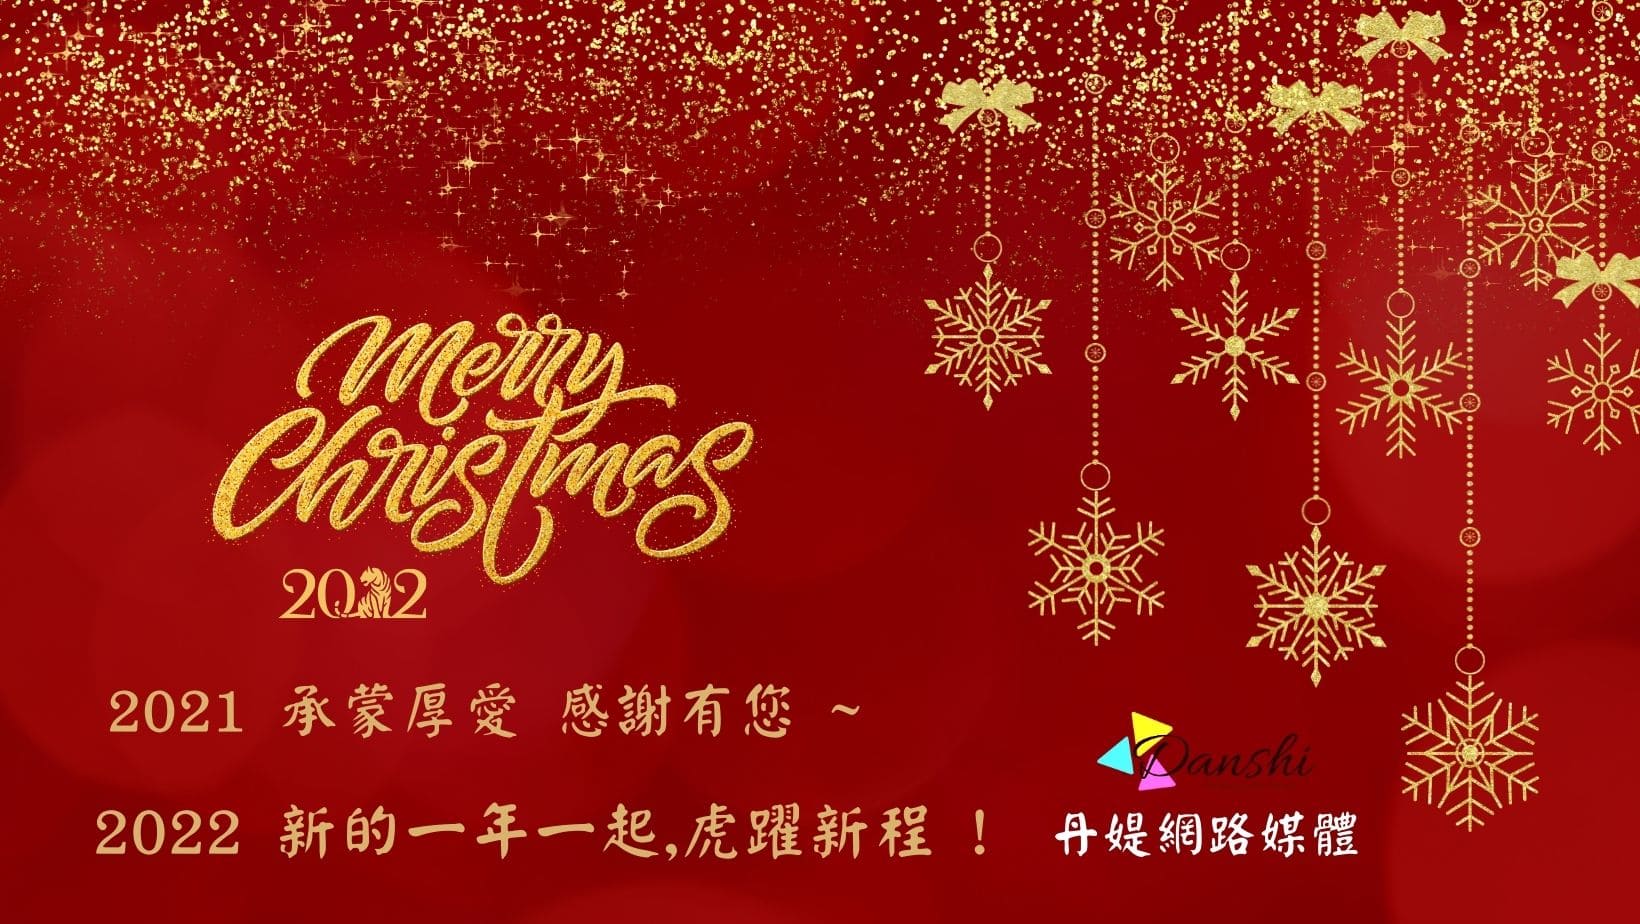 White Merry Christmas and Happy New Year Facebook Cover 的複本 (1).jpg